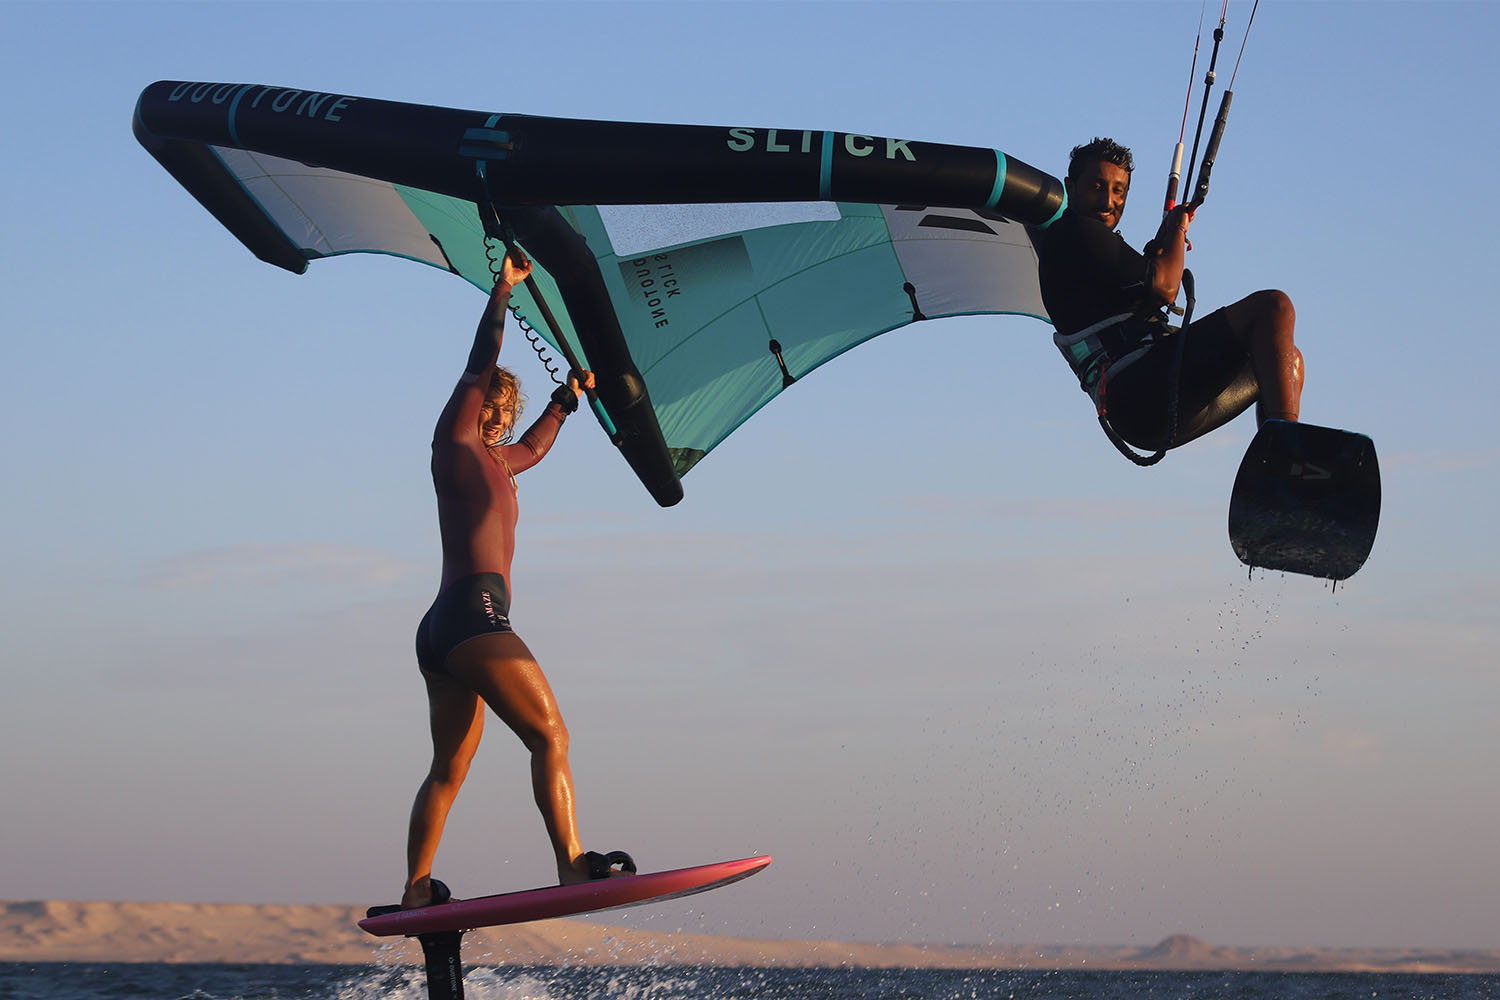 kitesurfer and wingsurfer jumping on the spot in front of ION CLUB Dakhla Lagoon during sunset